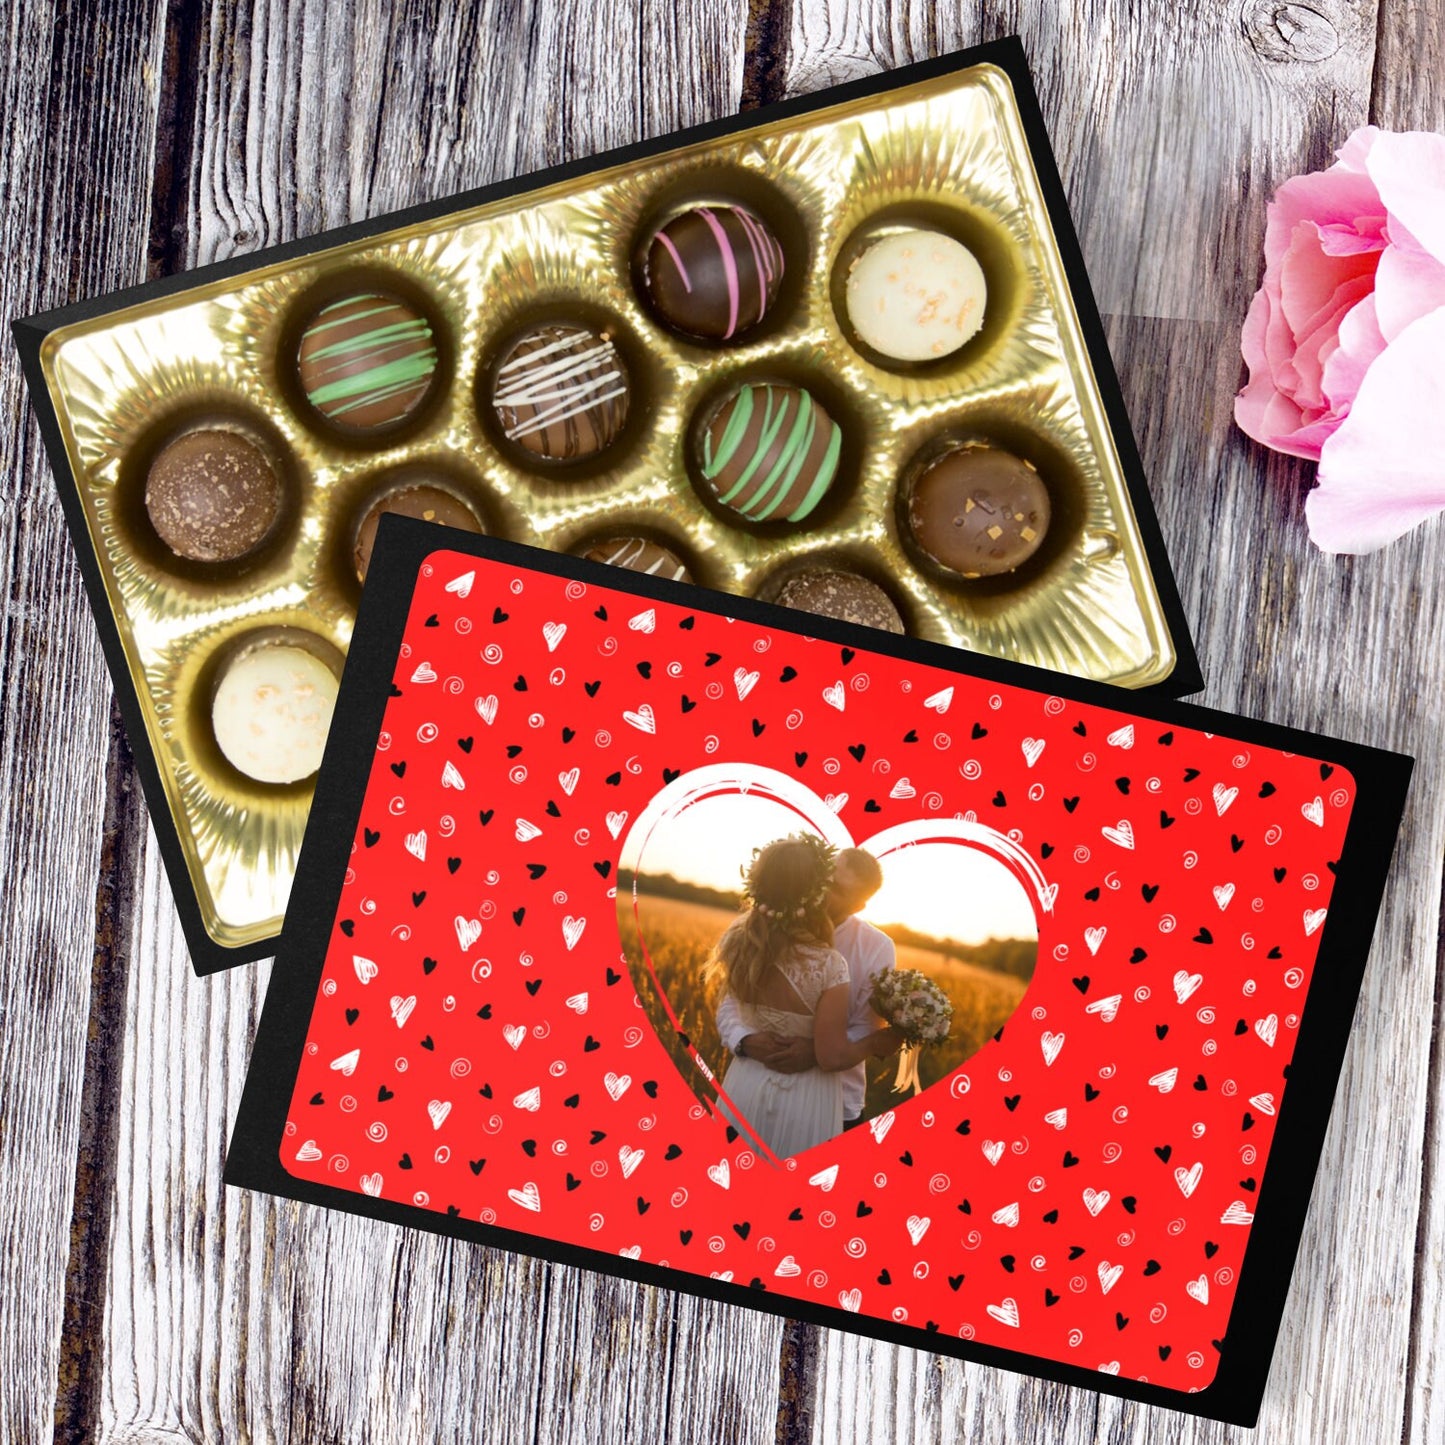 Personalized Chocolate Truffles, First Valentines Day Gift Married, Wedding Photo Gift, Chocolate Truffle Gift Box, Sentimental Gift